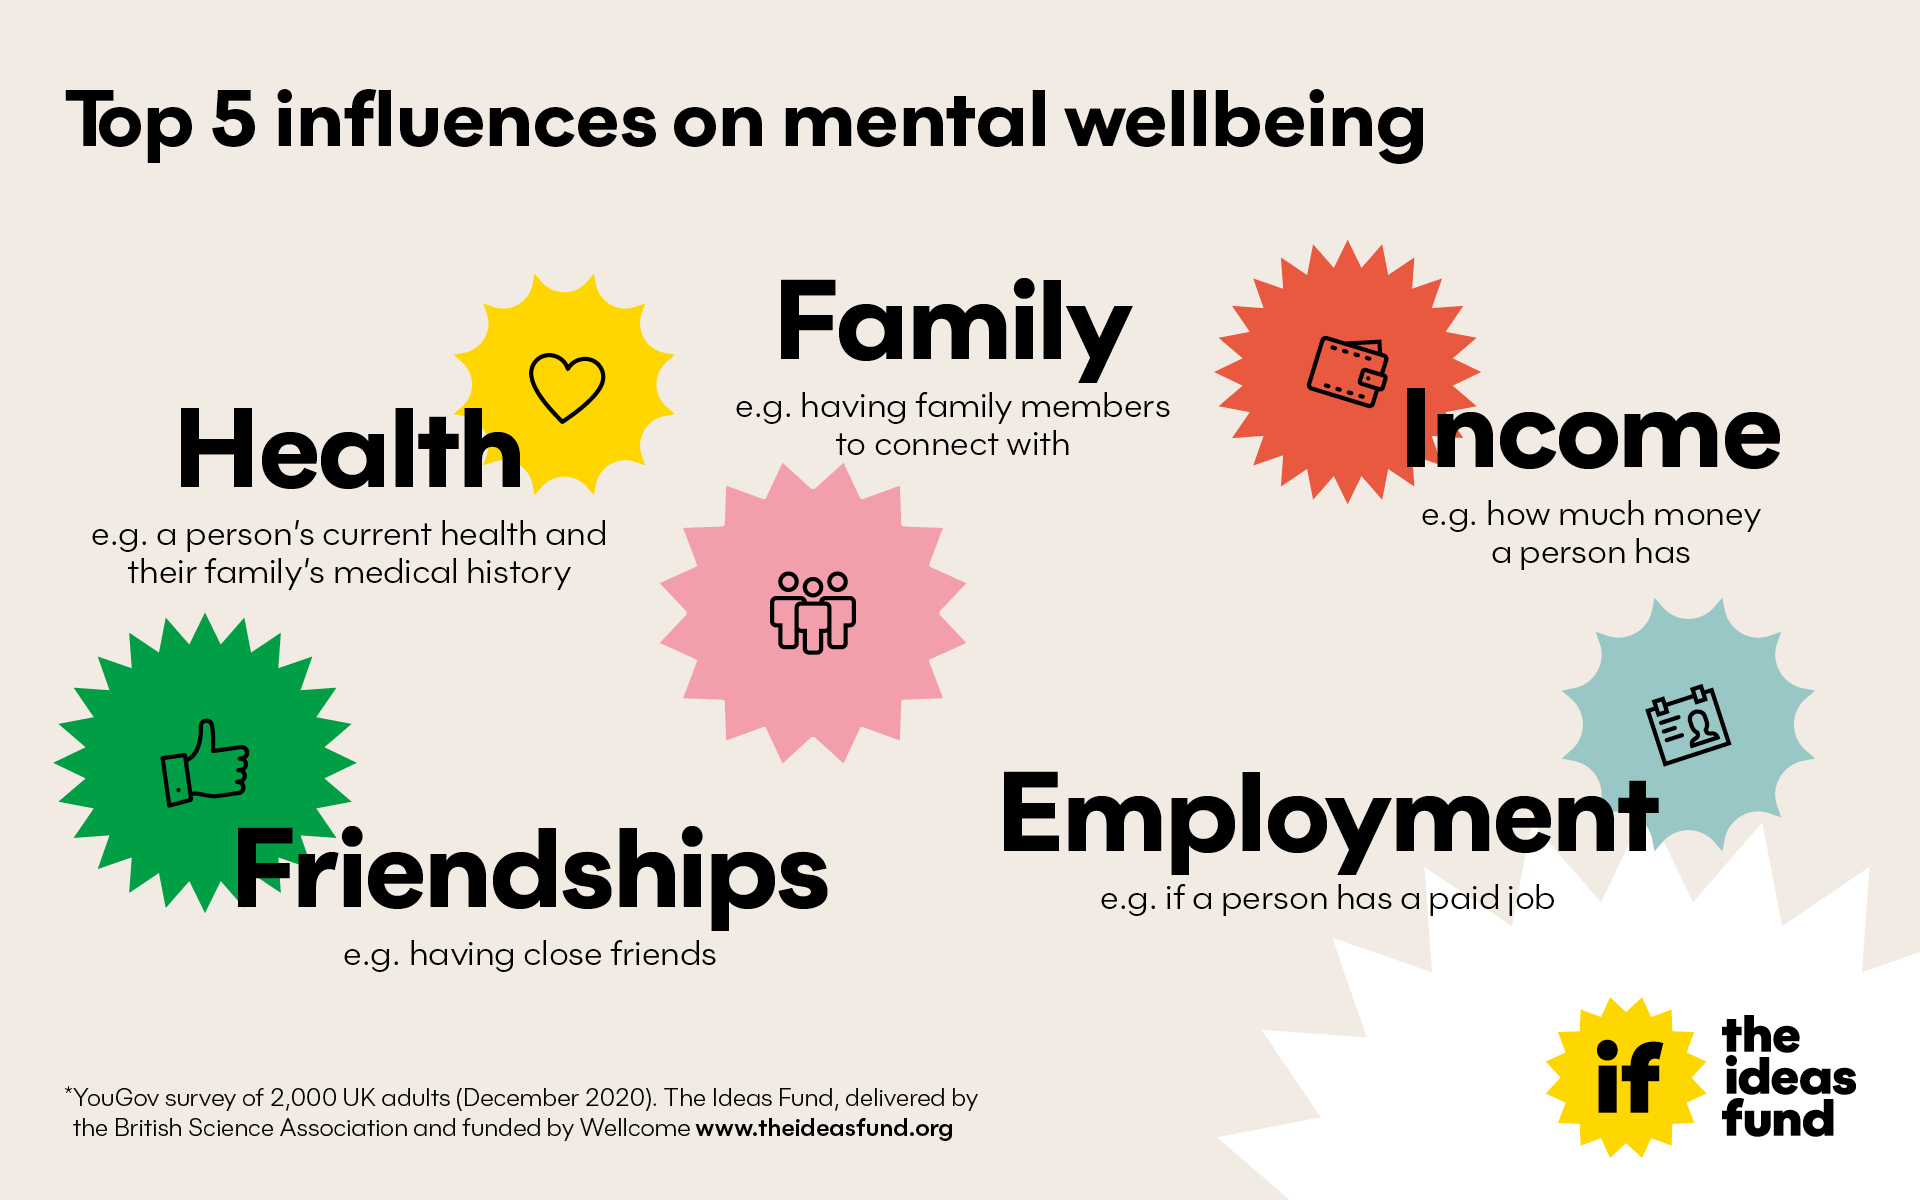 Top 5 influences on mental wellbeing